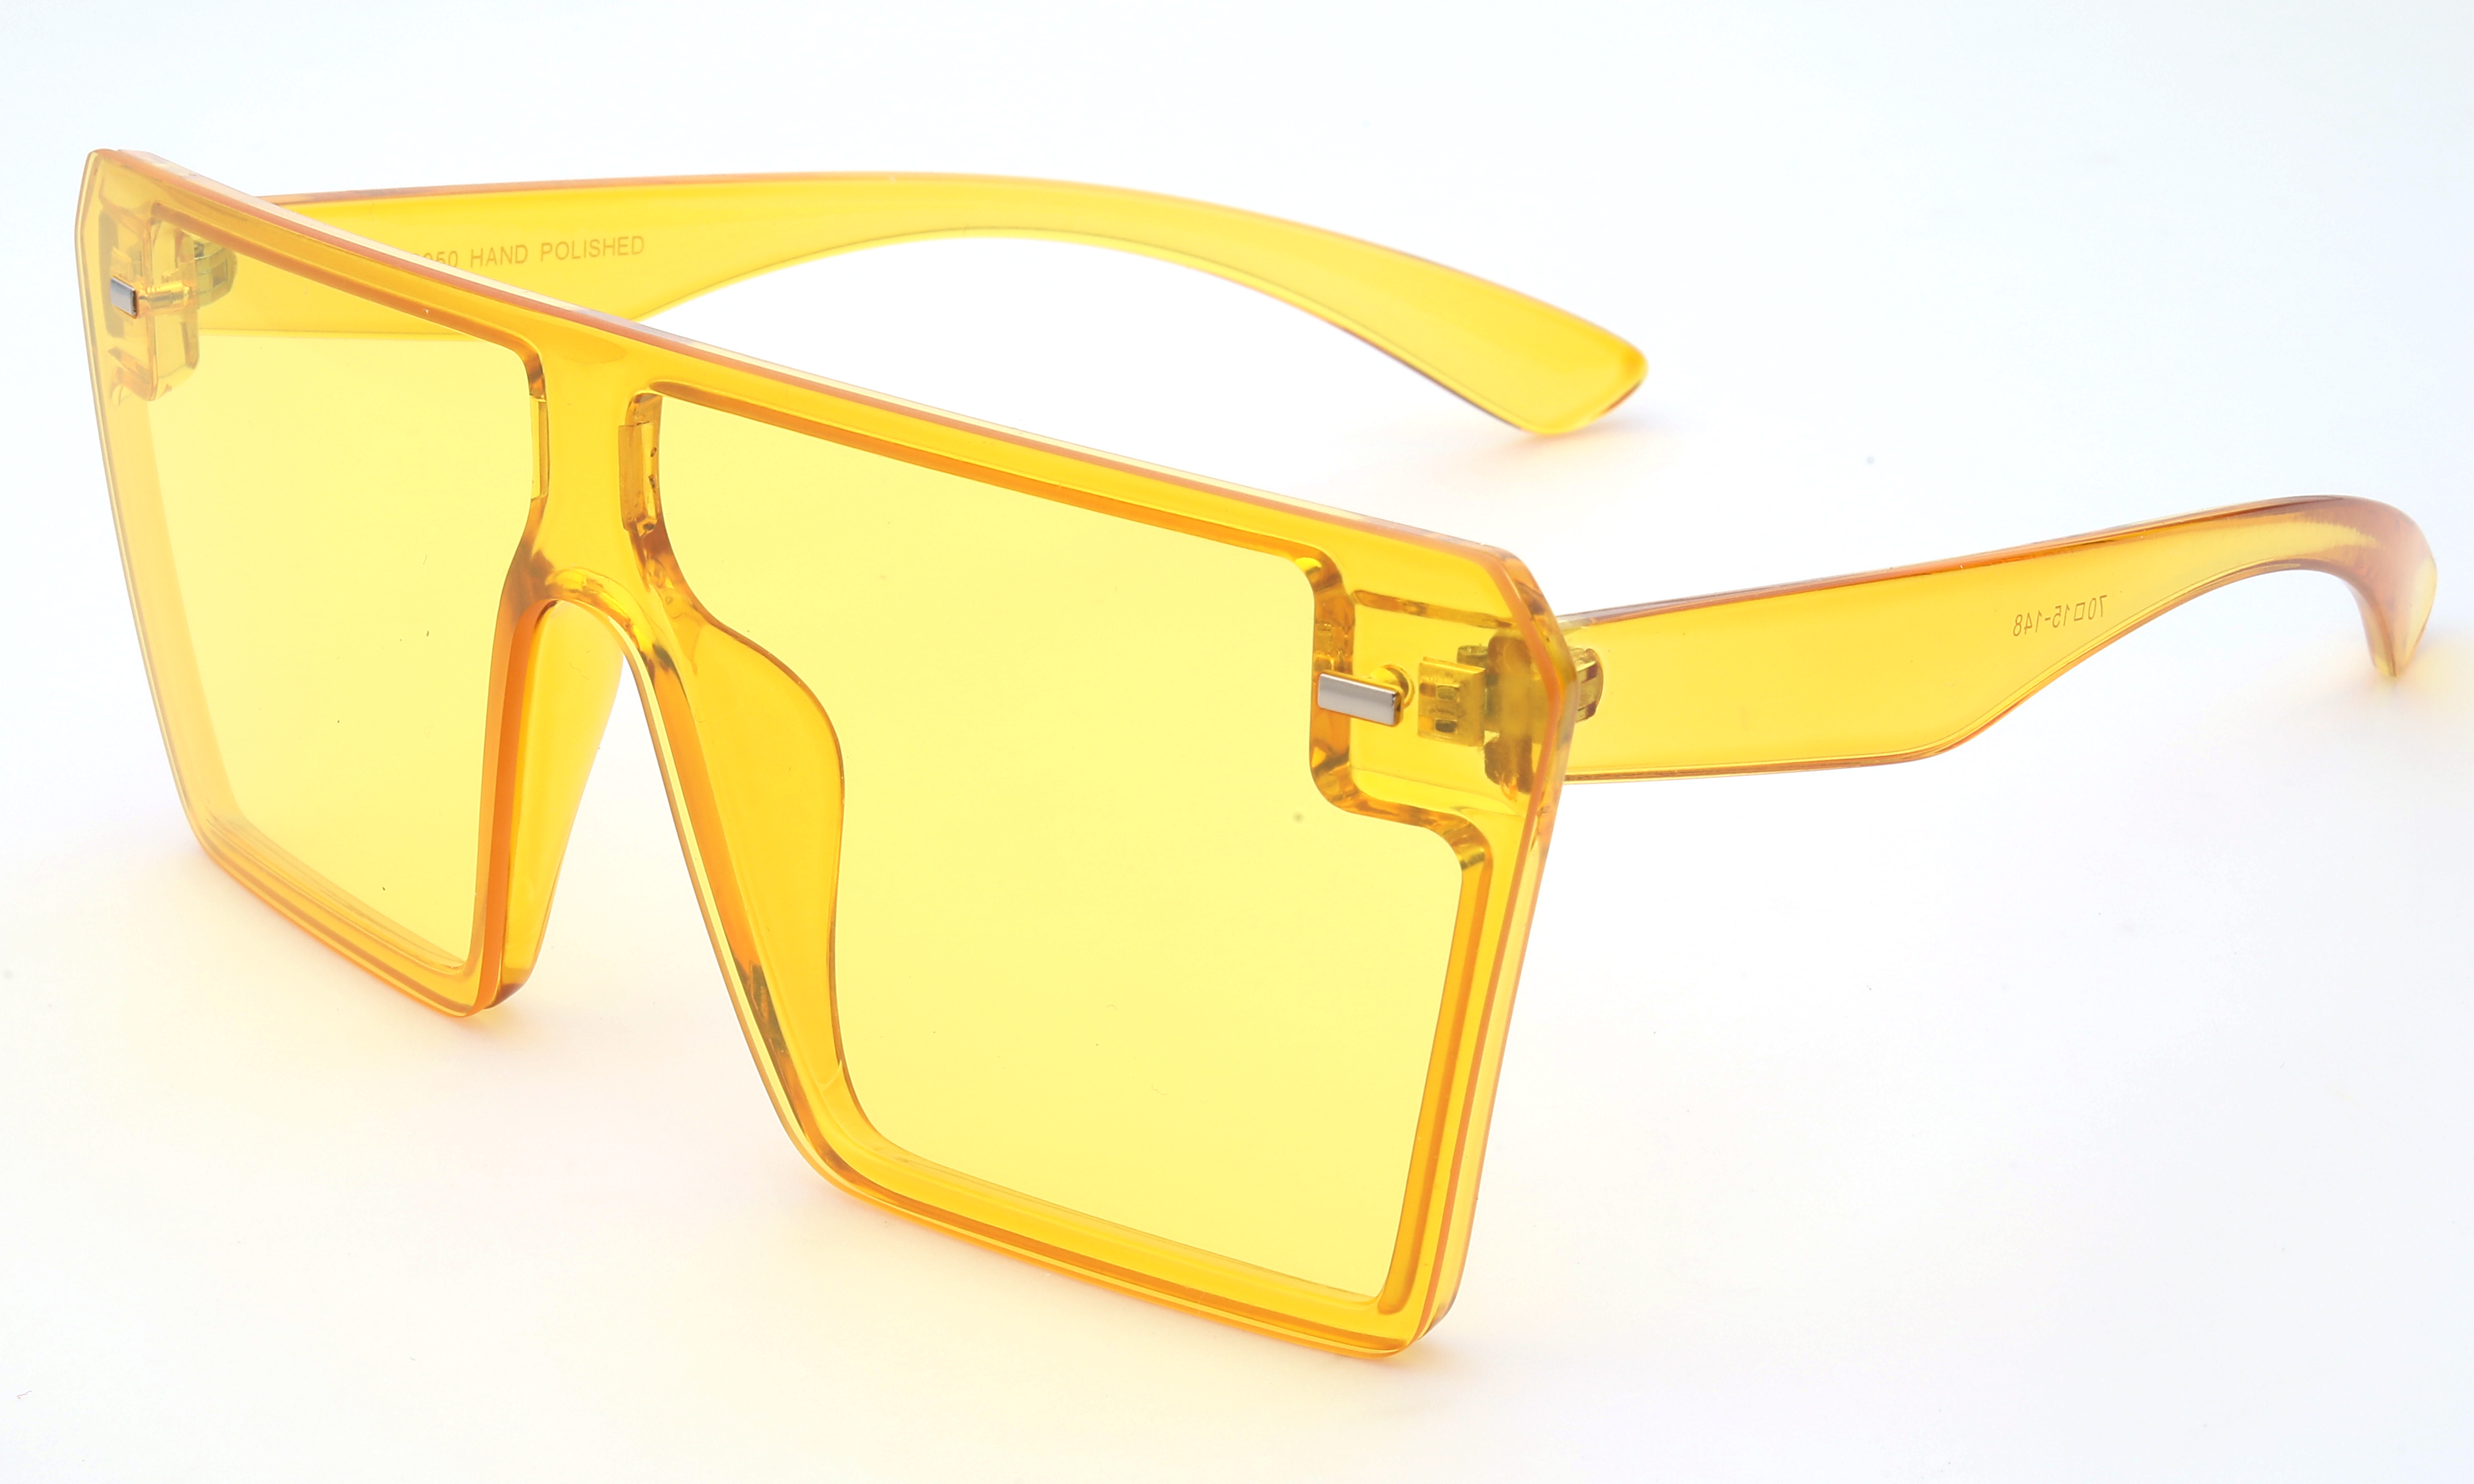 Newbee Fashion Square Vintage Oversized One Piece Large Lens Sunglasses for Women, Men, Junior Teen, Rectangle Flat Top Composite Frame, Big Wind Shield Lens w/ Rivet, UV 400, Yellow Frame Yellow Lens - image 1 of 2